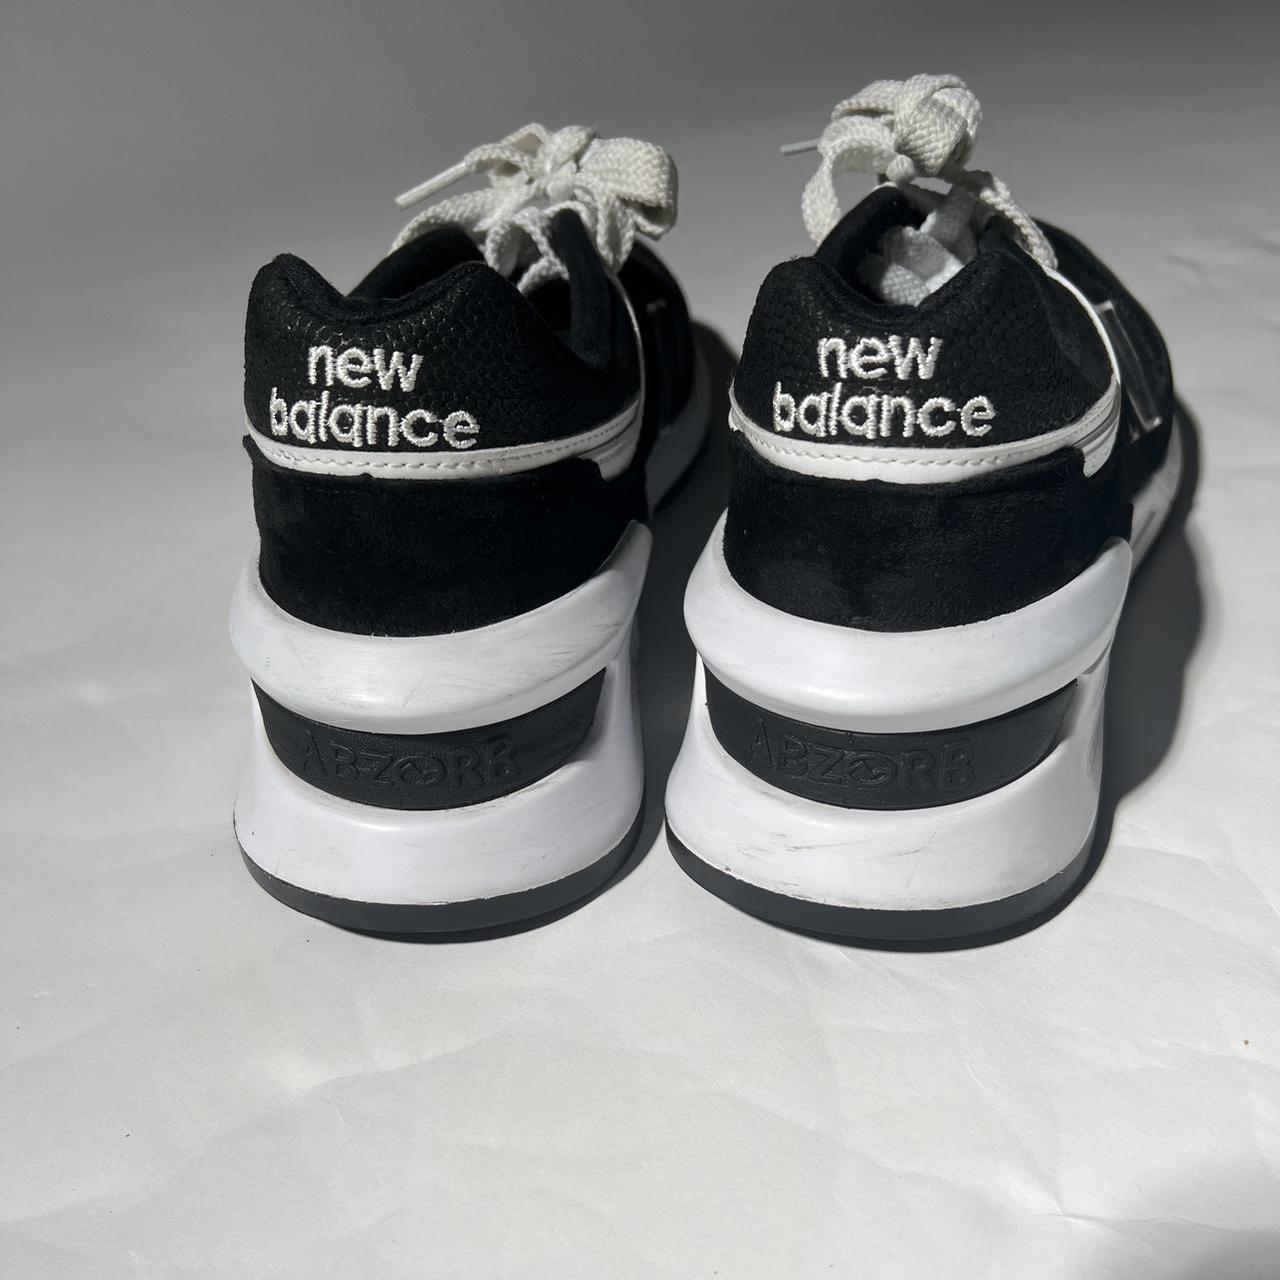 New Balance Men's Black and White Trainers - 6